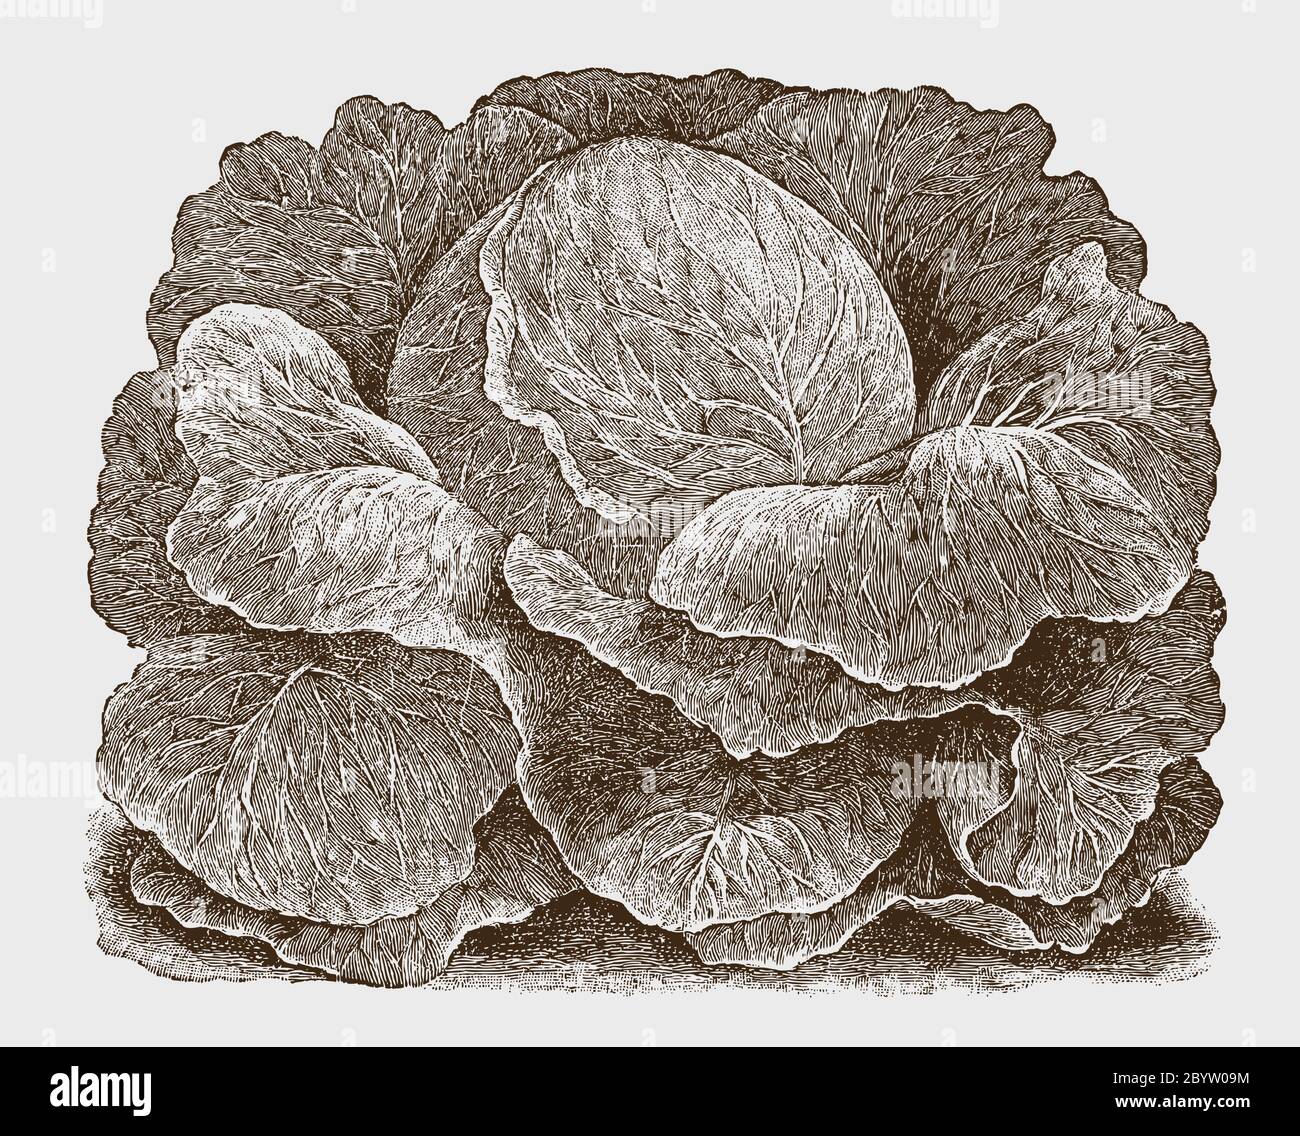 Early round head cabbage cultivar, after a historical engraving from the early 20th century Stock Vector